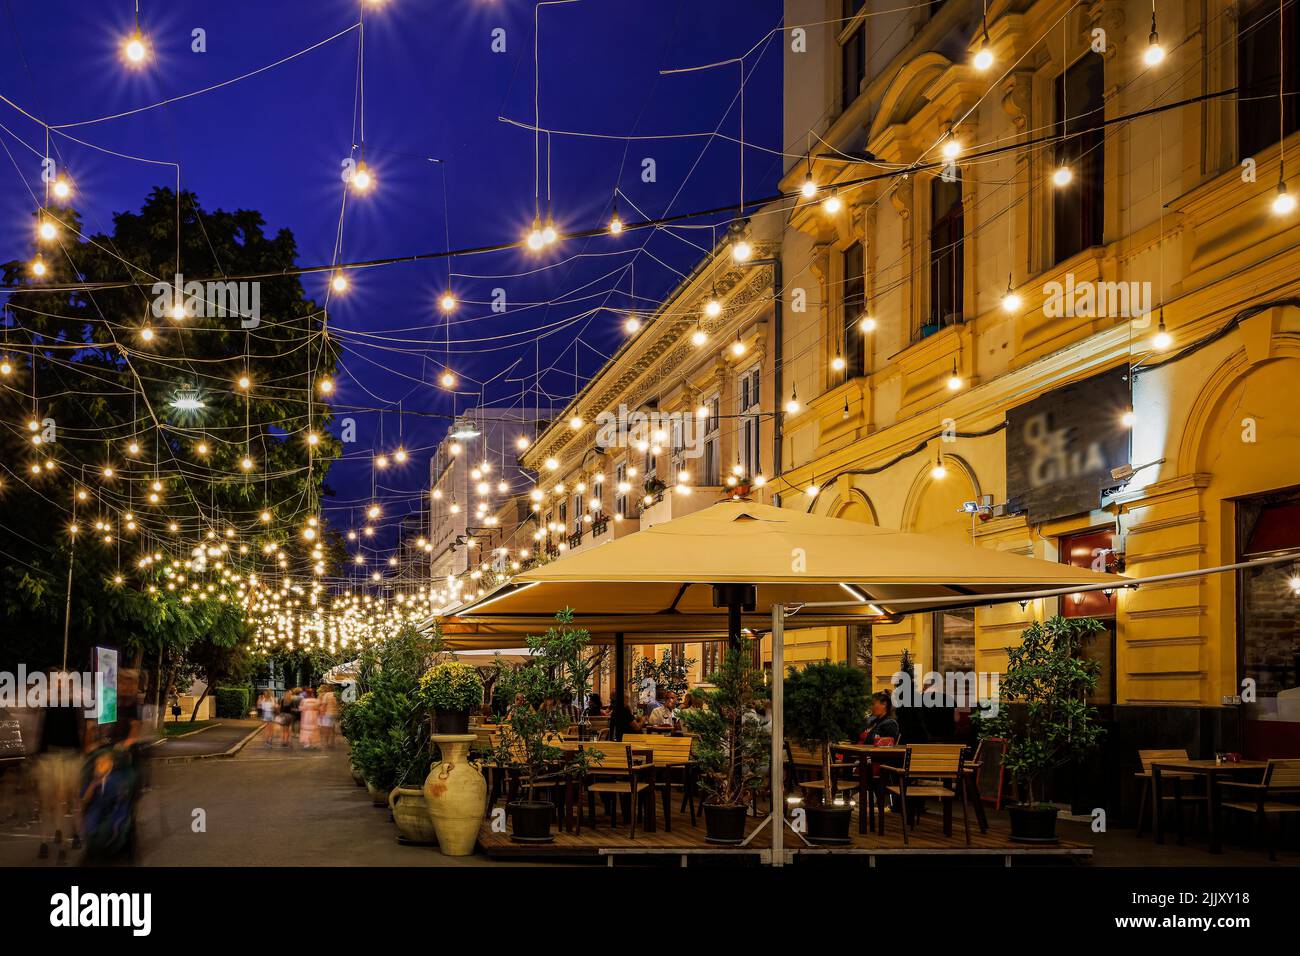 Pedestrian street with restaurants and terraces, decorated with hundreds of light bulbs. Photo taken on 17th July 2022 in Arad, Arad County, Romania. Stock Photo